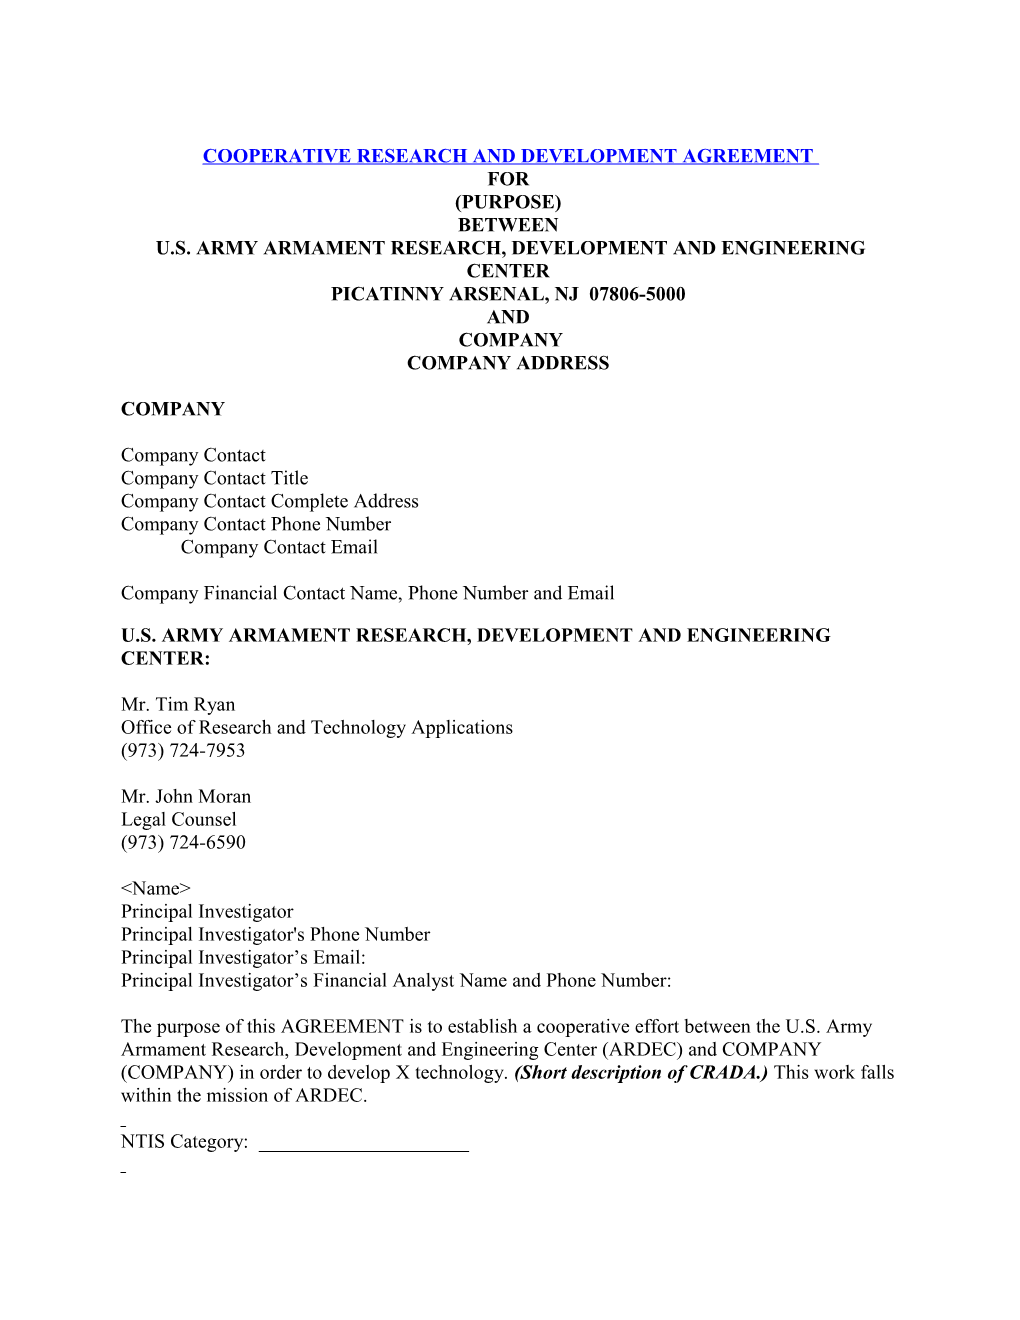 Cooperative Research and Development Agreement Template s1